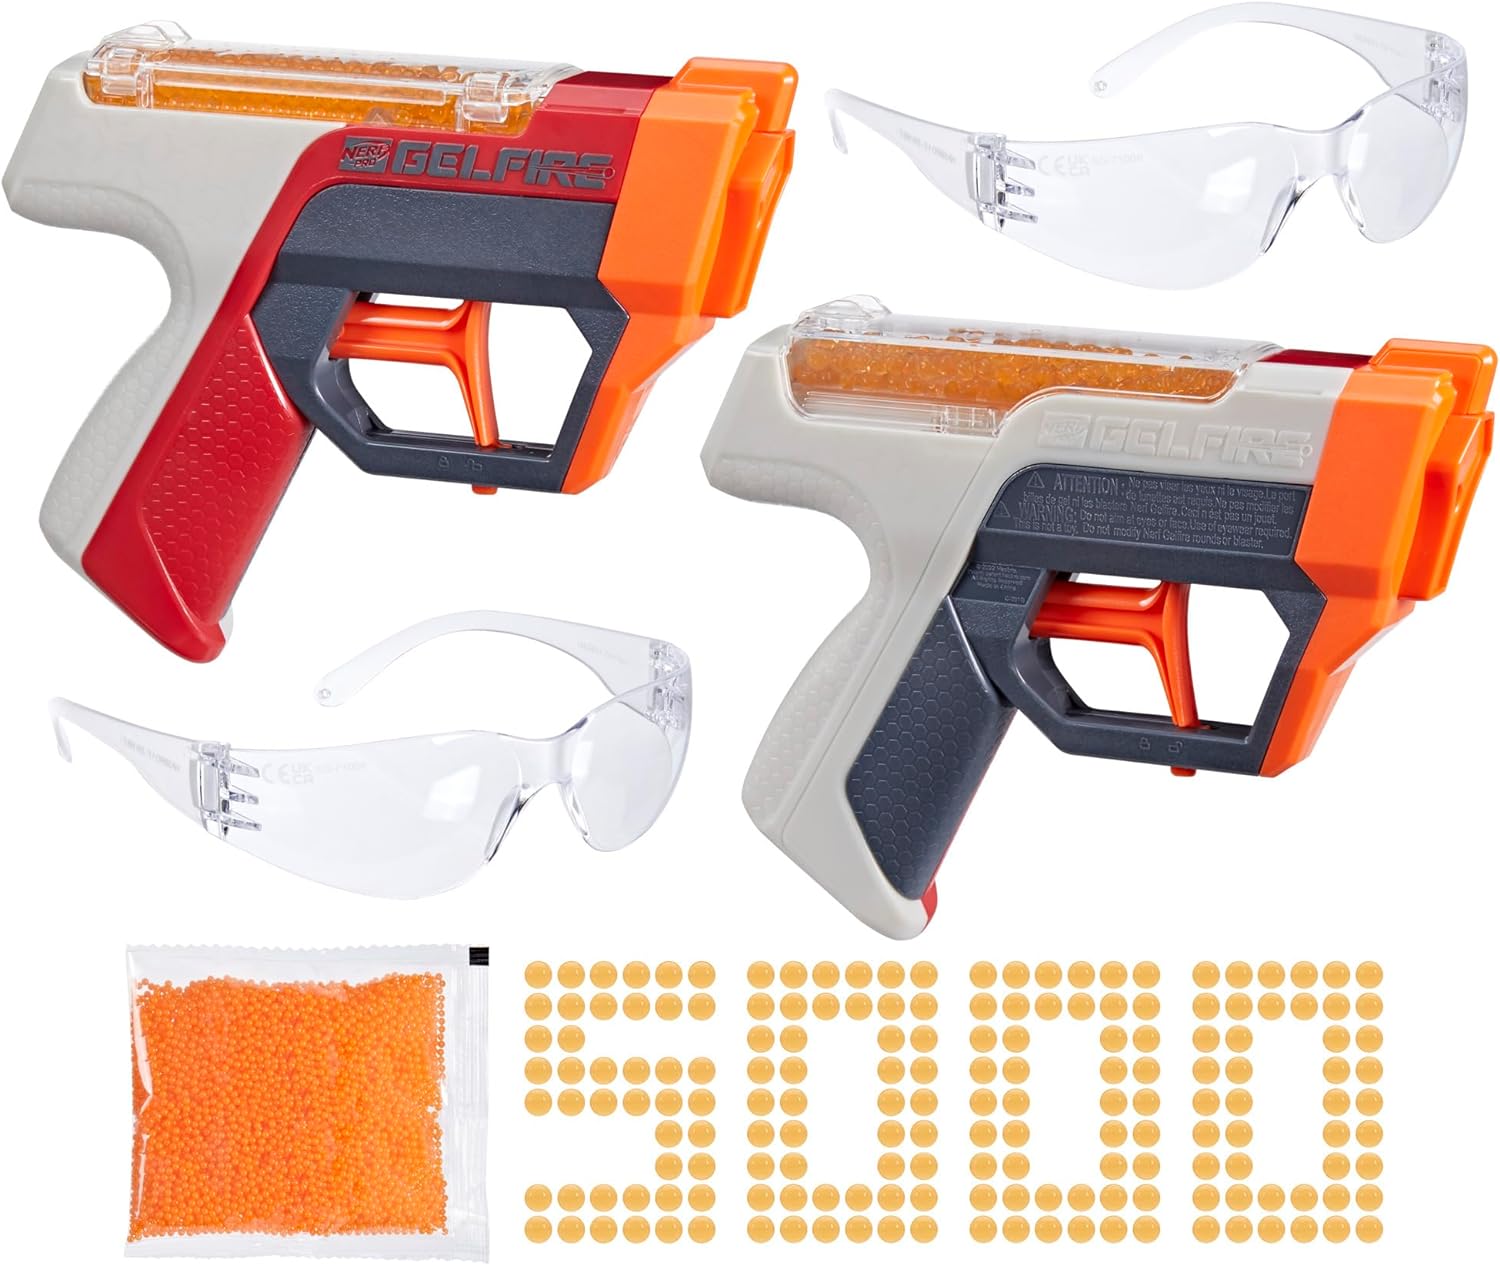 NERF Pro Gelfire Dual Wield Pack, 2 Blasters, No-Prime Firing, 5000 Gelfire Rounds, 2X 100 Round Integrated Hoppers, 2 Eyewear, Ages 14 & Up